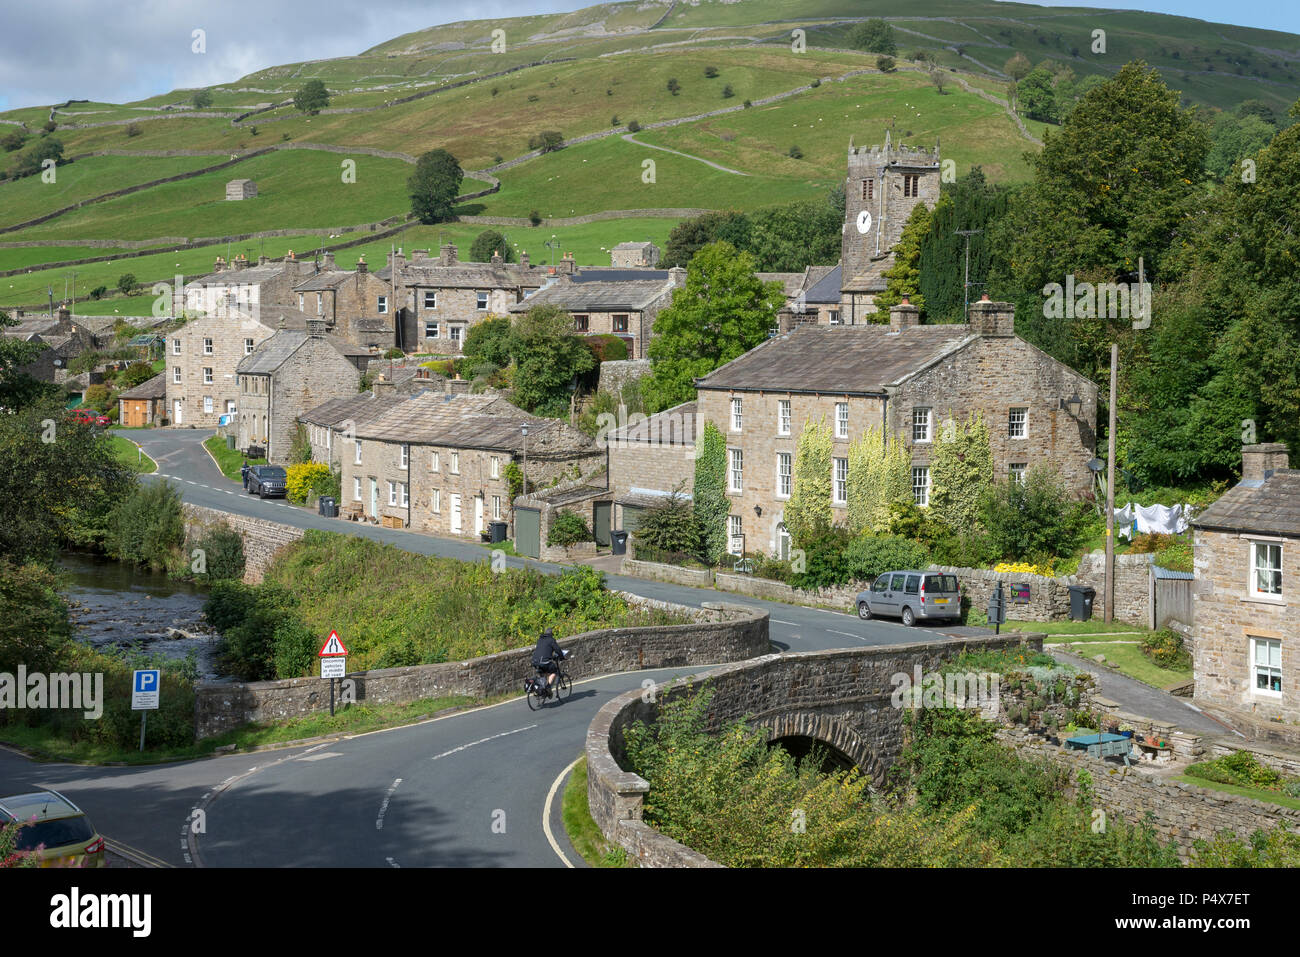 The village of Muker in Swaledale, Yorkshire Dales national park, England. Stock Photo